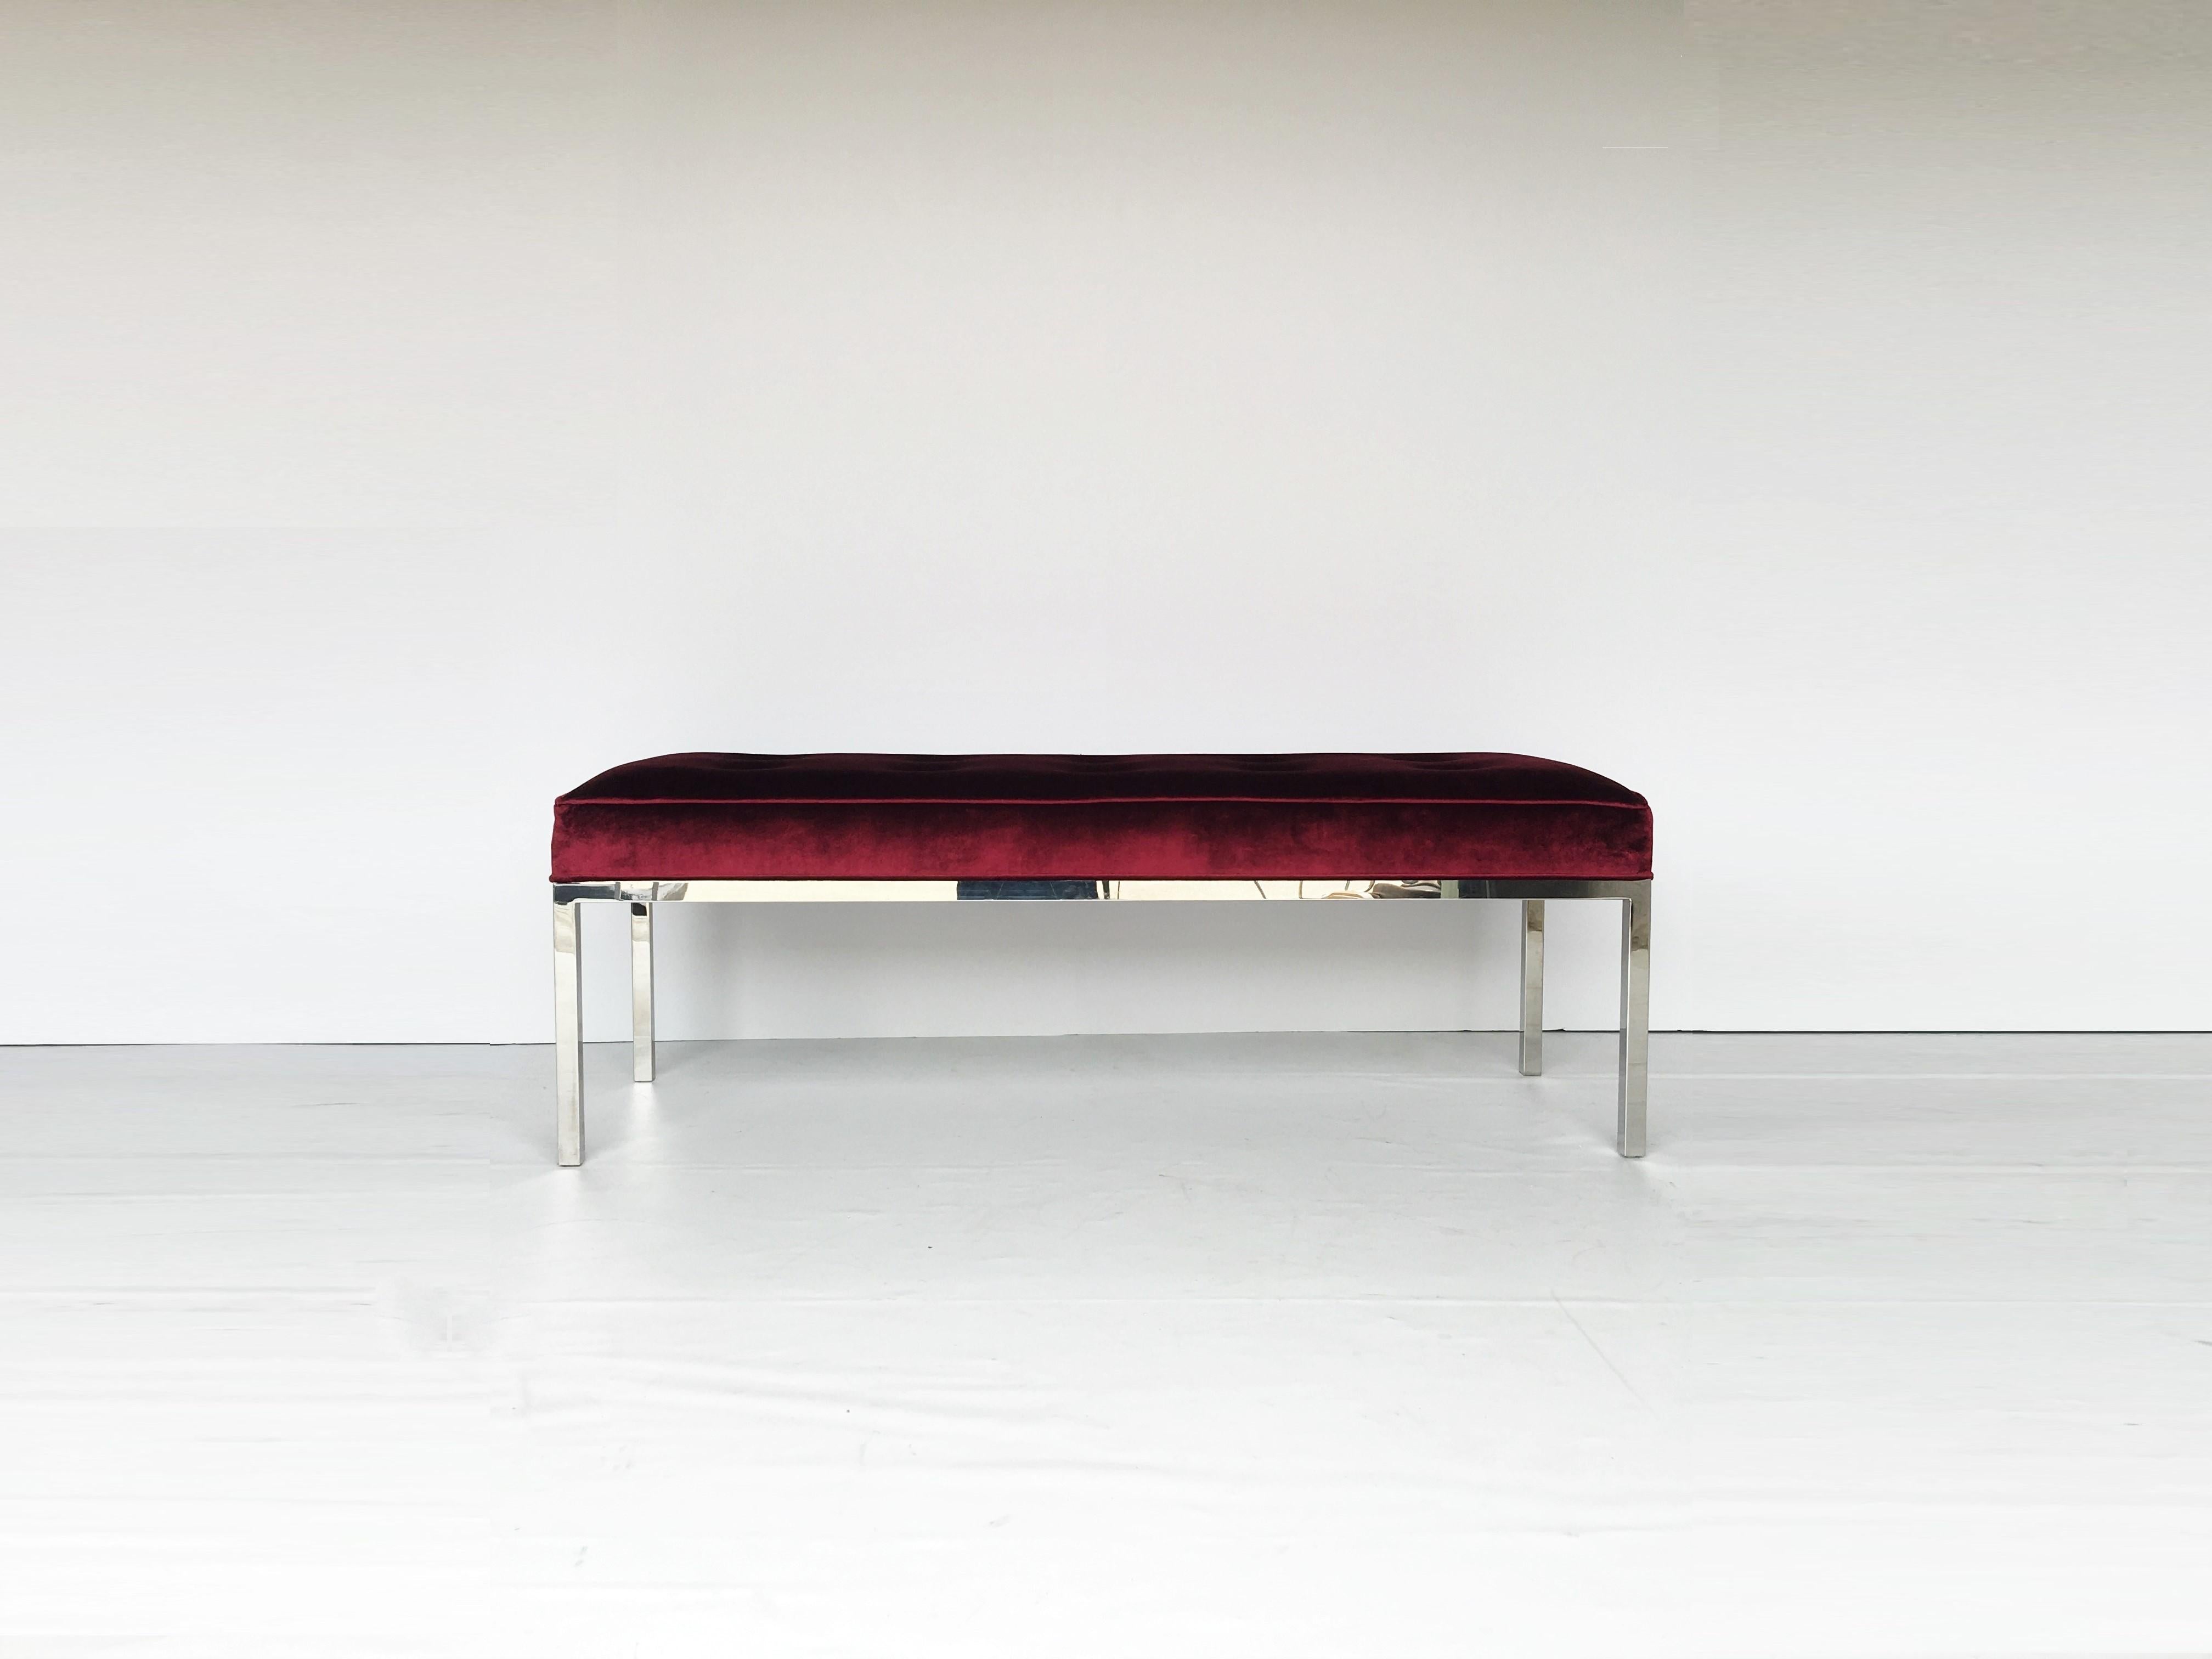 Designed by Florence Knoll in 1954, the bench is one of the great design achievements of modern times. Produced by Knoll, circa 1970s. The frame and legs are constructed of heavy gauge chrome-plated steel. The tufted seat is upholstered in high